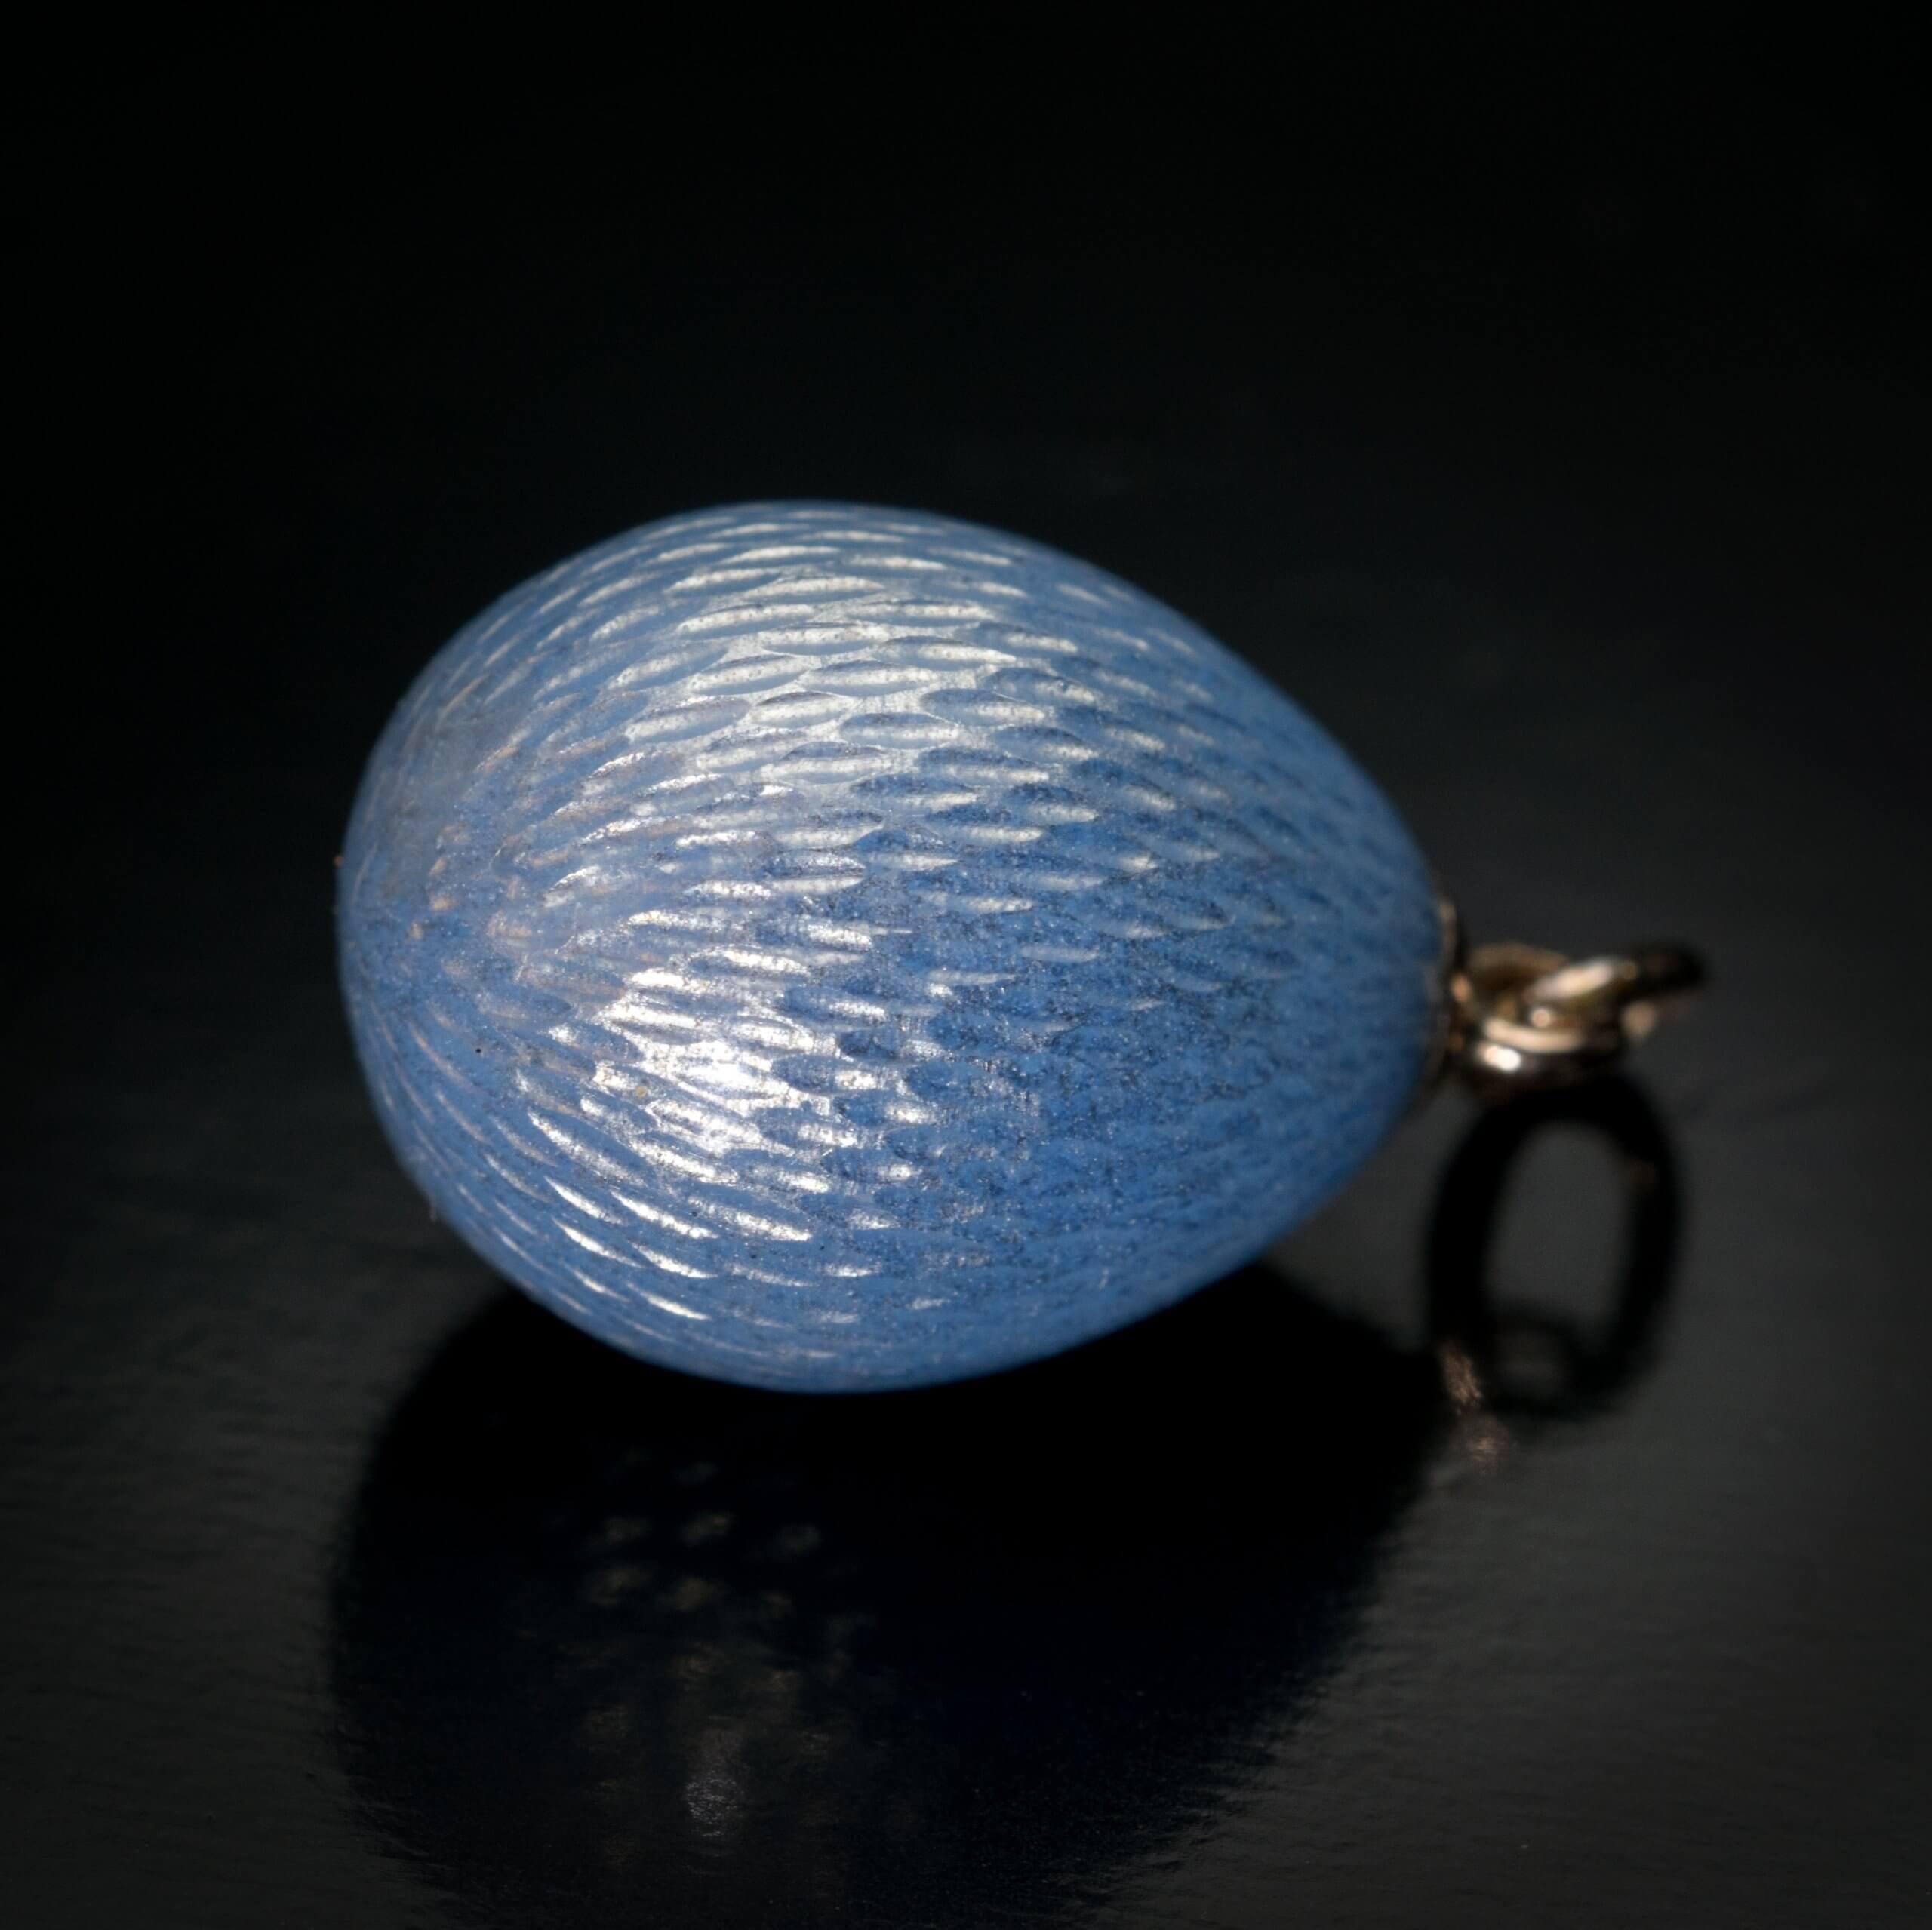 Made in Saint Petersburg between 1908 and 1917.  This FABERGE miniature egg is covered with a silver blue translucent guilloche enamel of a very fine quality.  The egg is marked with 56 zolotnik old Russian gold standard (14K) and initials ‘ФА’ for